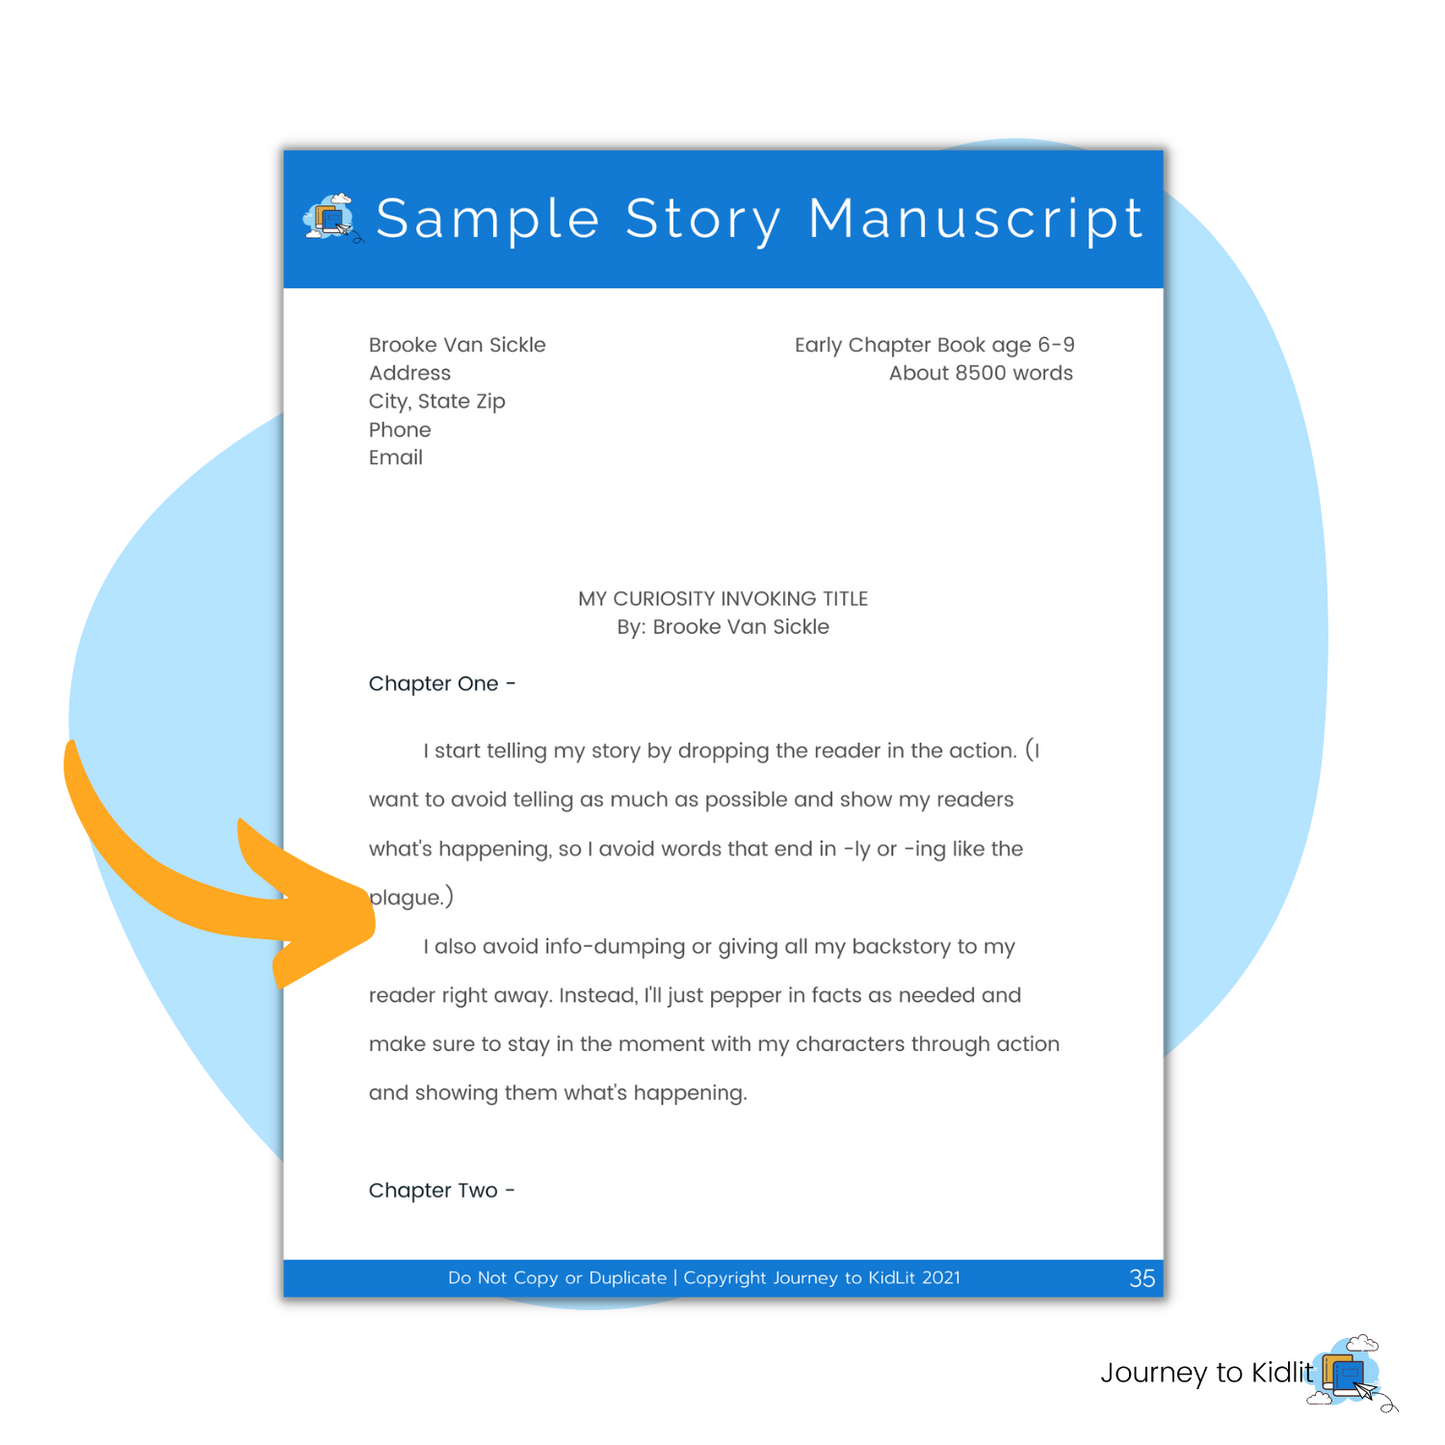 Sample story manuscript for Children's Book Writers to format their stories.